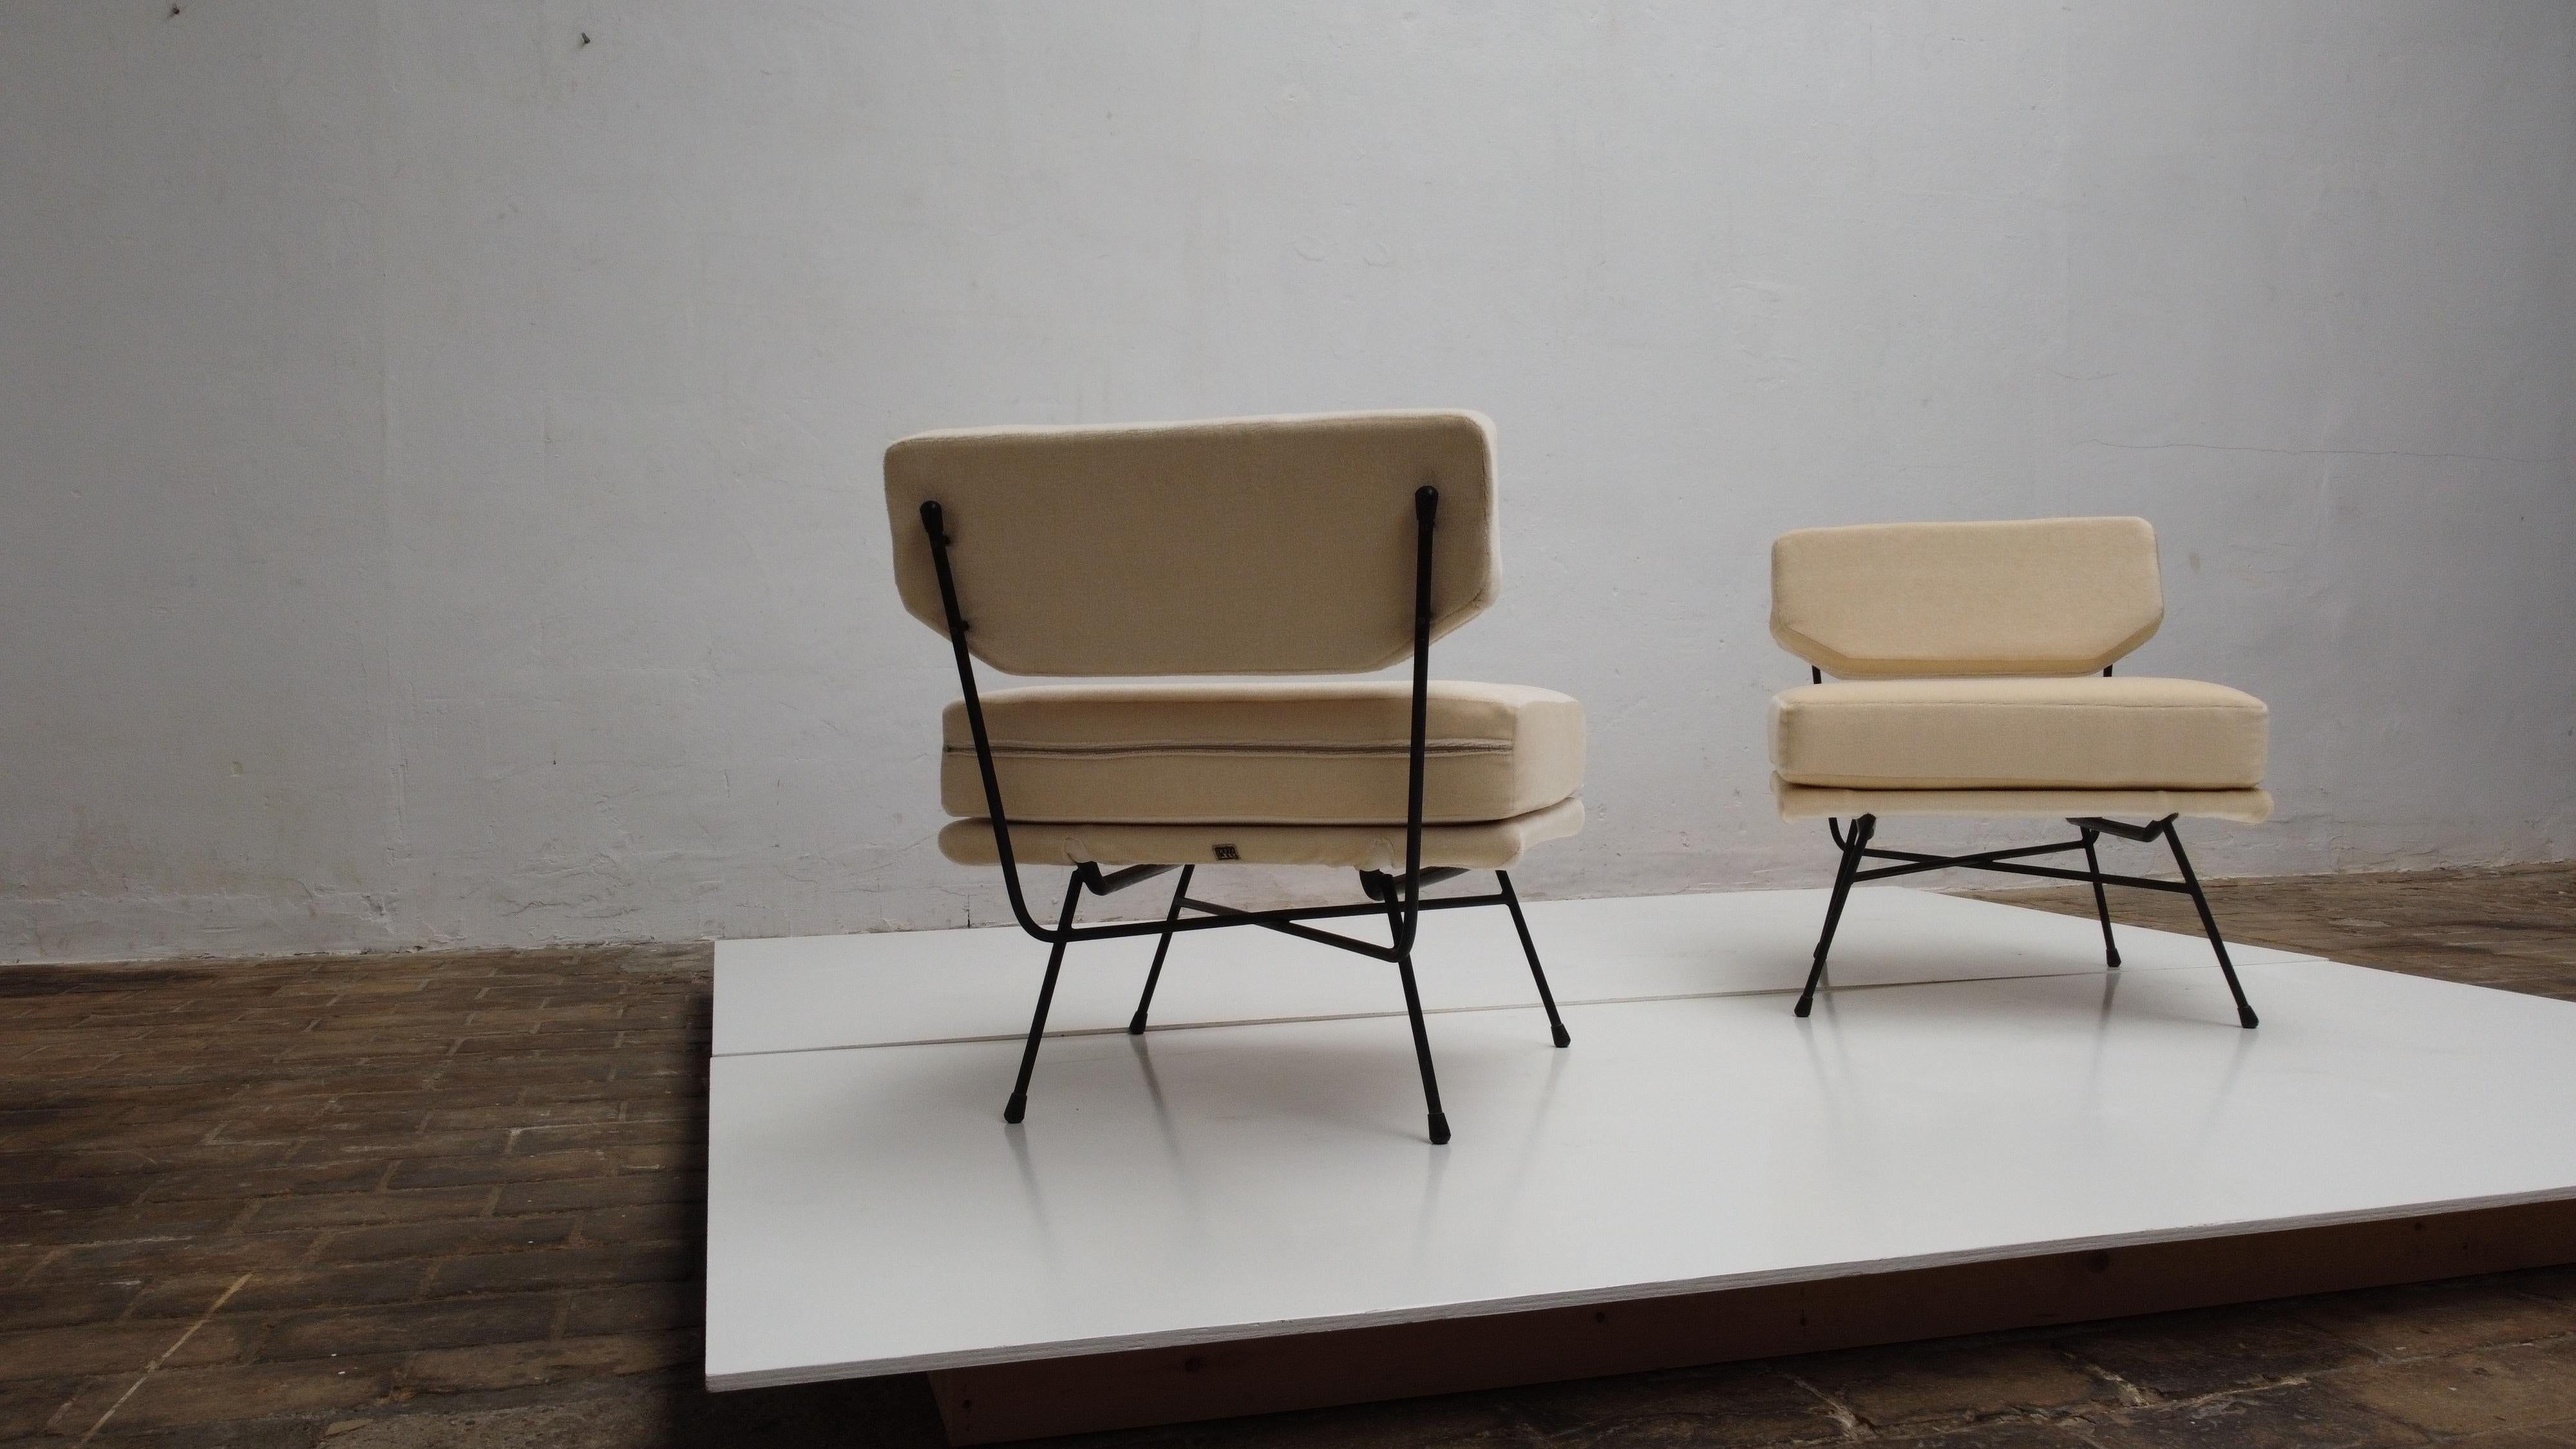 Italian Pair of 'Elettra' Lounge Chairs by BBPR, Arflex, Italy 1953, Compasso D'Oro 1954 For Sale